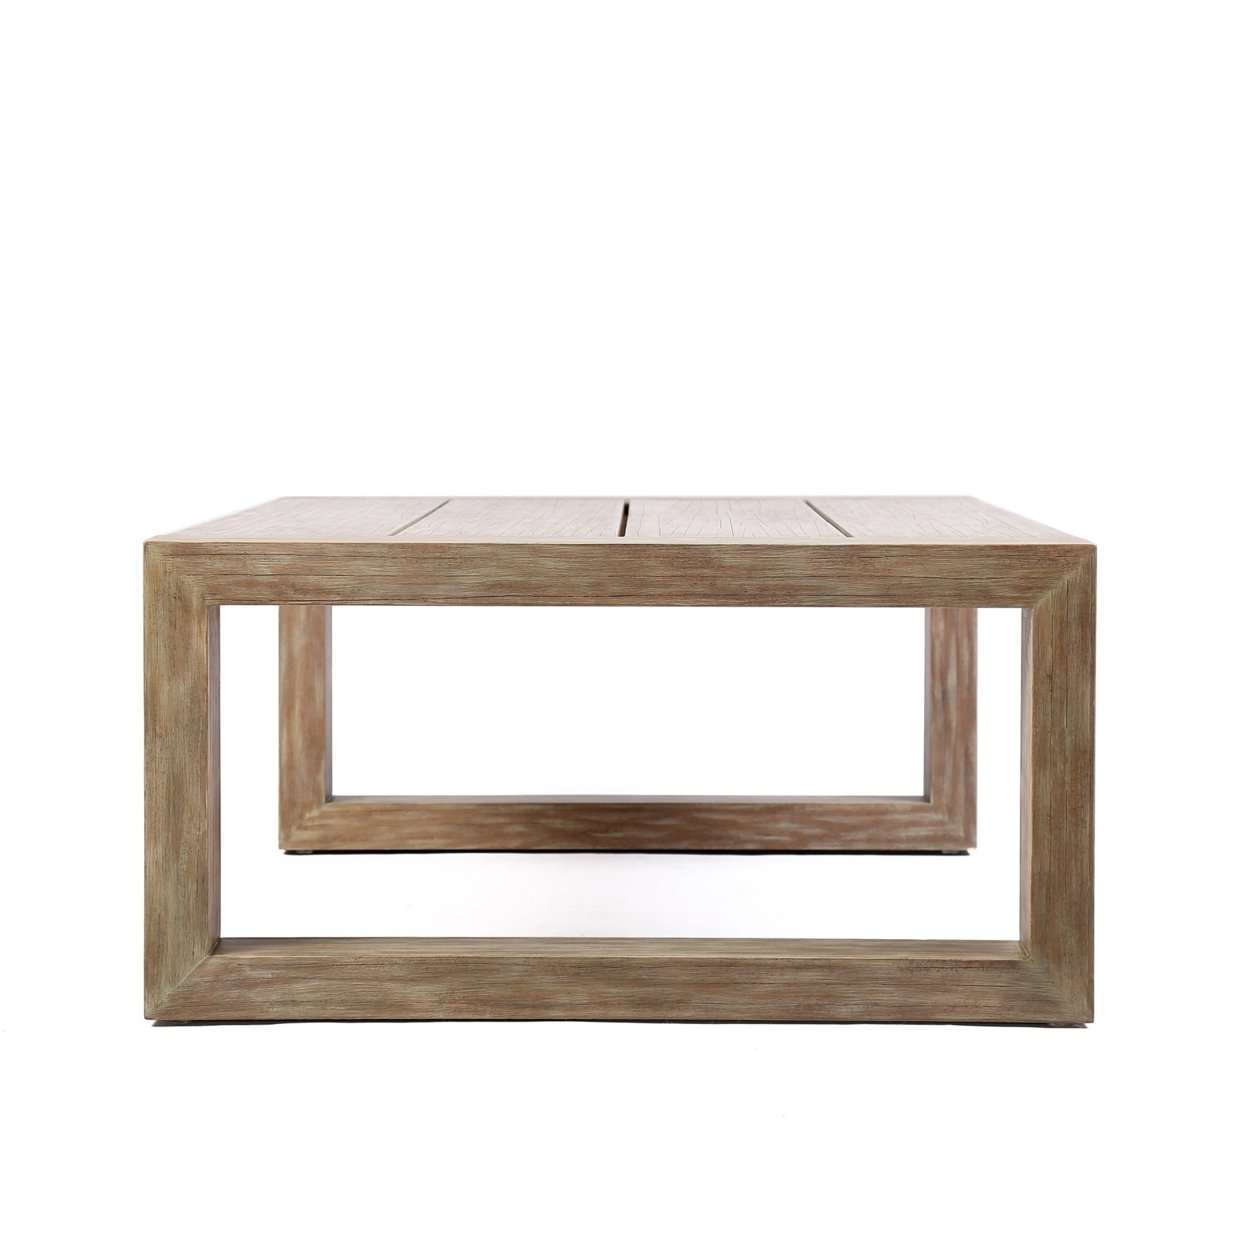 Wooden Outdoor Coffee Table With Plank Design Top, Gray- Saltoro Sherpi